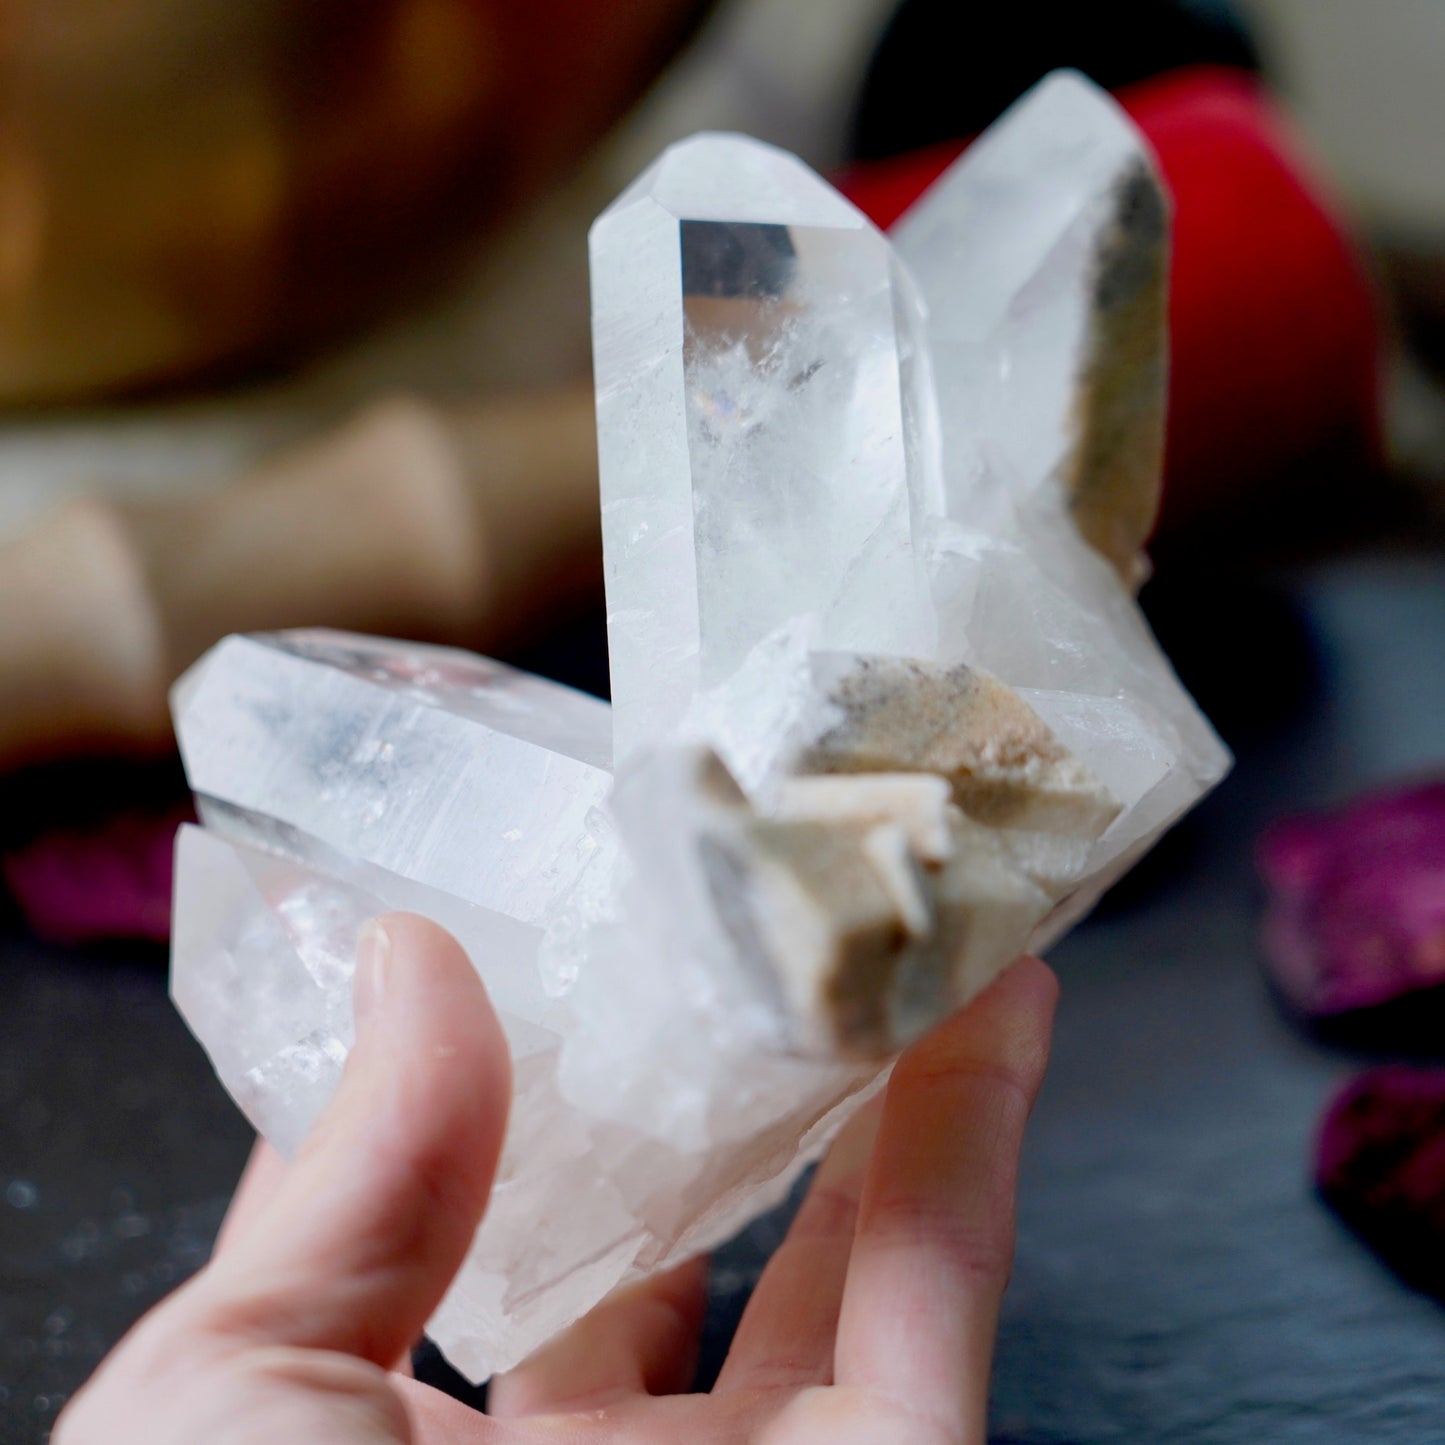 Lemurian Quartz Cluster with Chlorite Inclusions of Universal Awareness